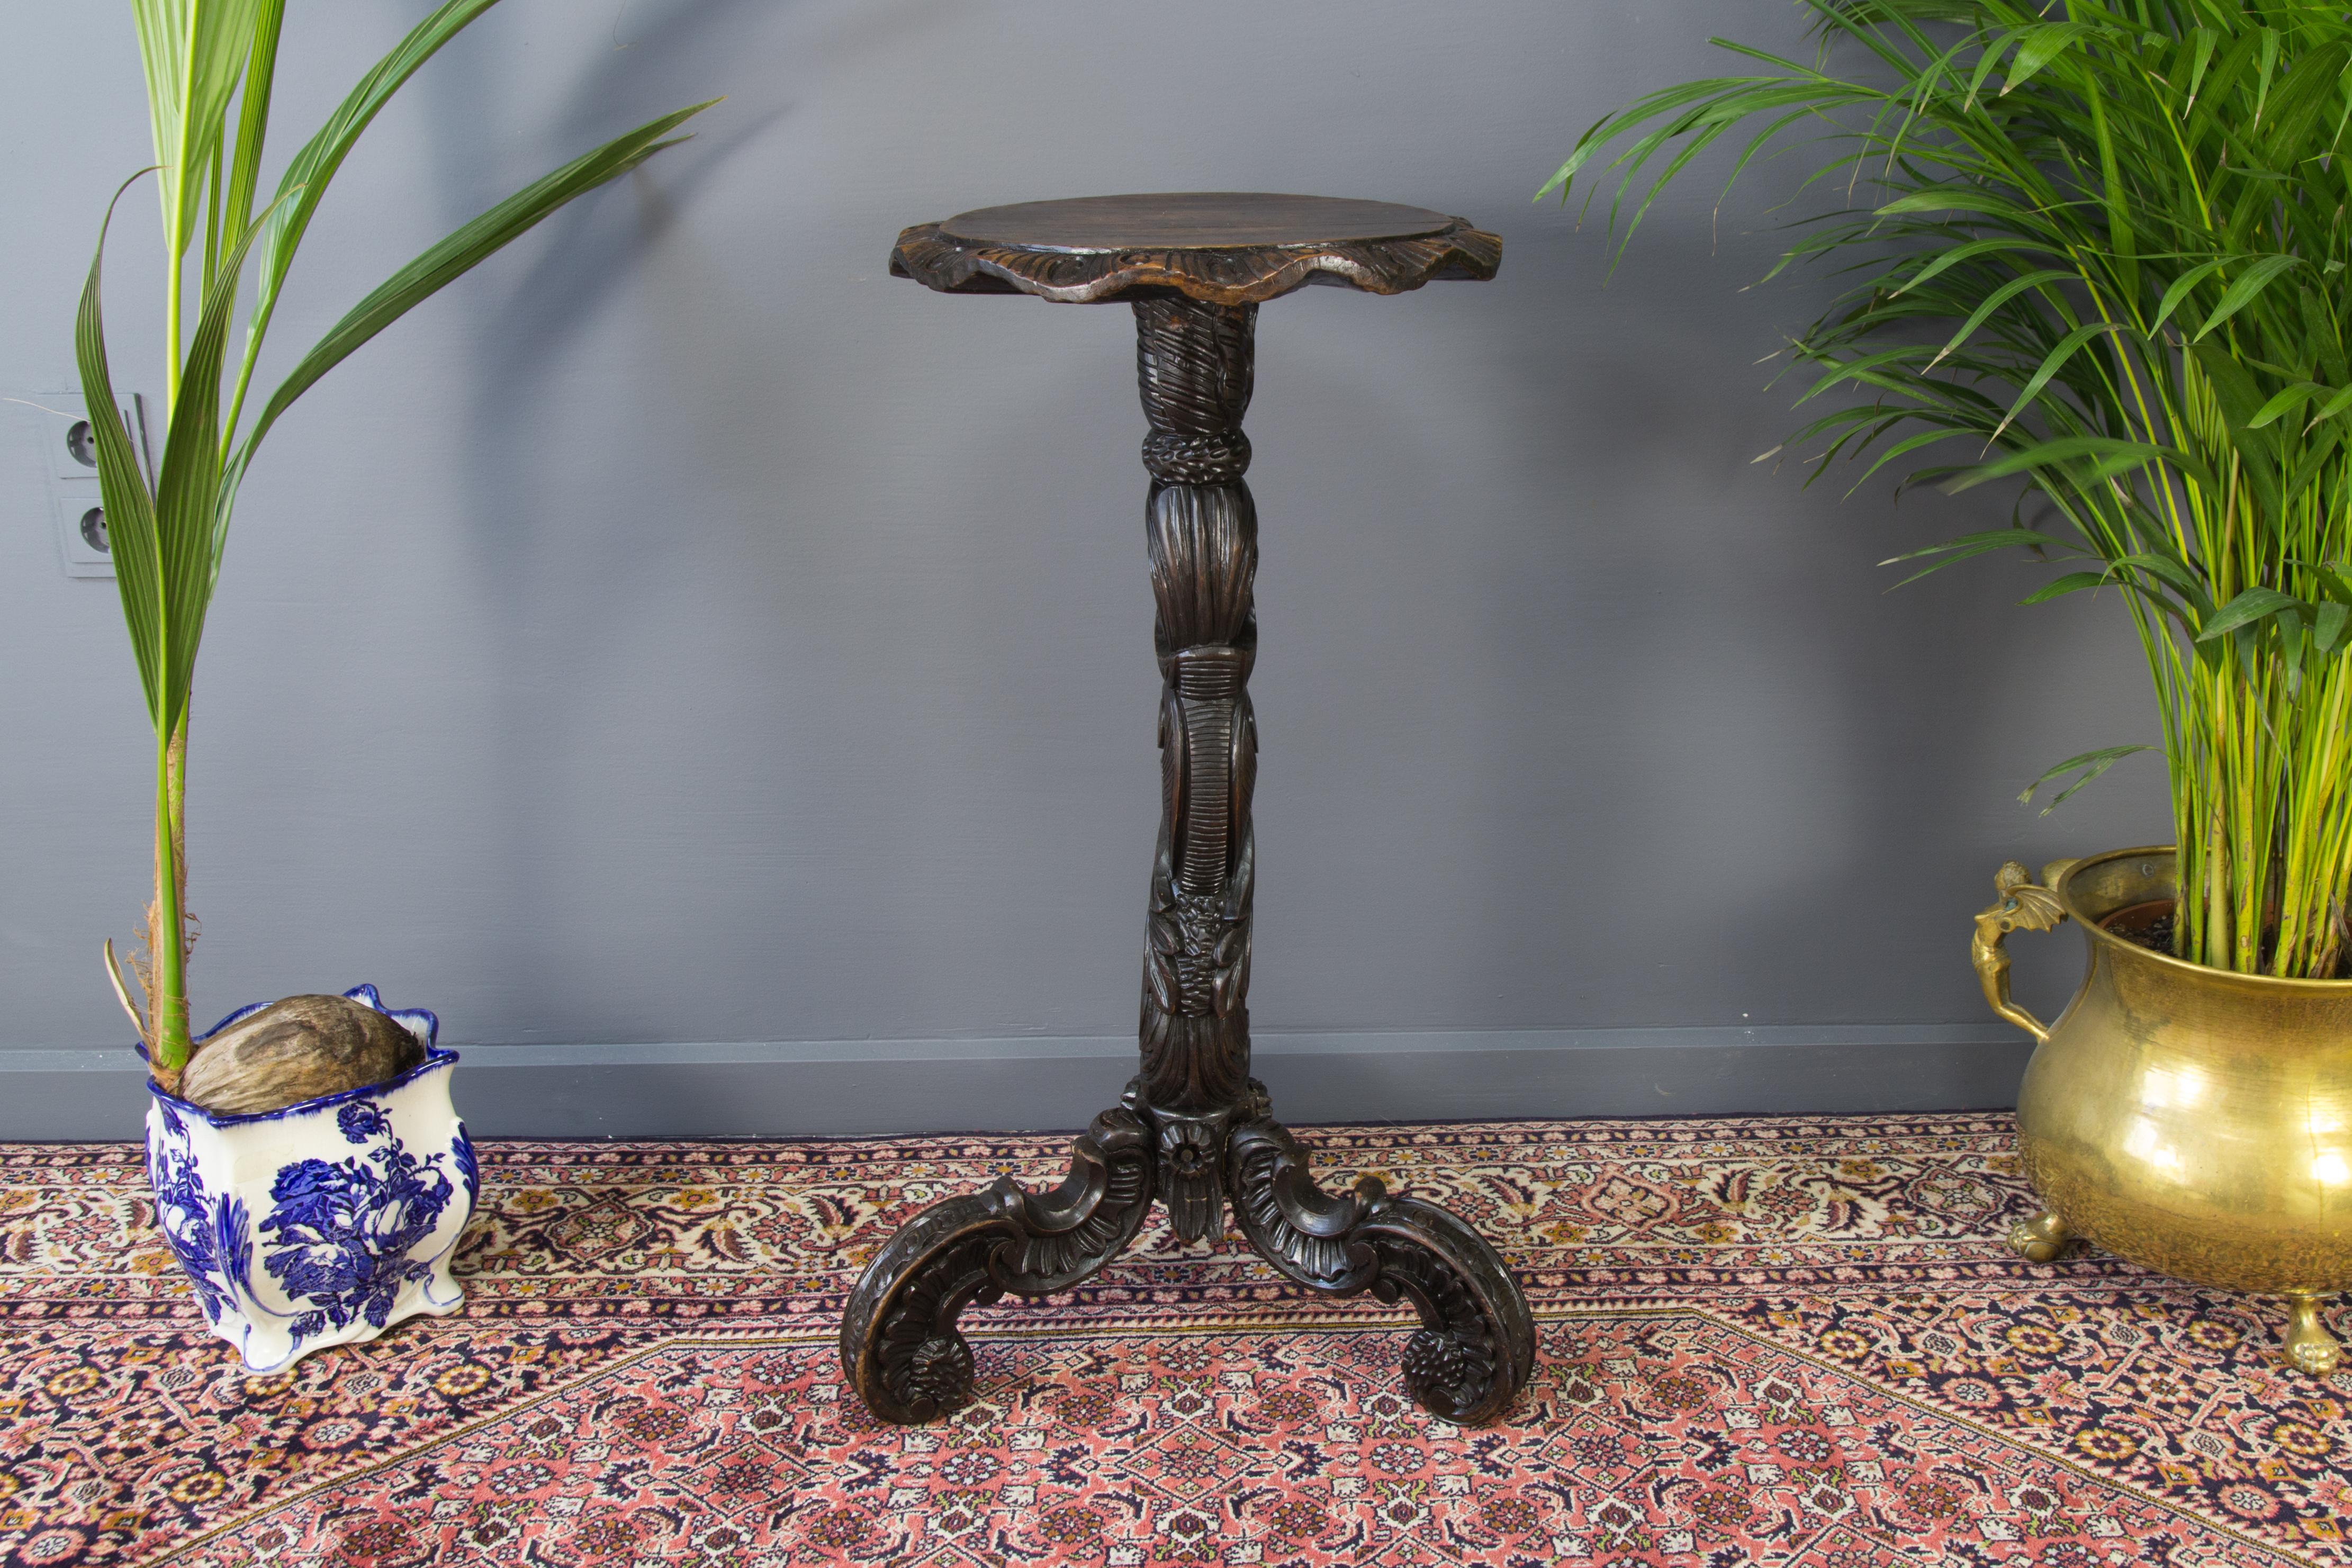 Very decorative French round pedestal table with nicely carved Rococo-style details.
Measures: height: 83 cm / 32.67 inches x 39 cm / 15.35 inches diameter top, 50 cm / 19.68 inches diameter base.
In good condition, with some marks and scuffs on the